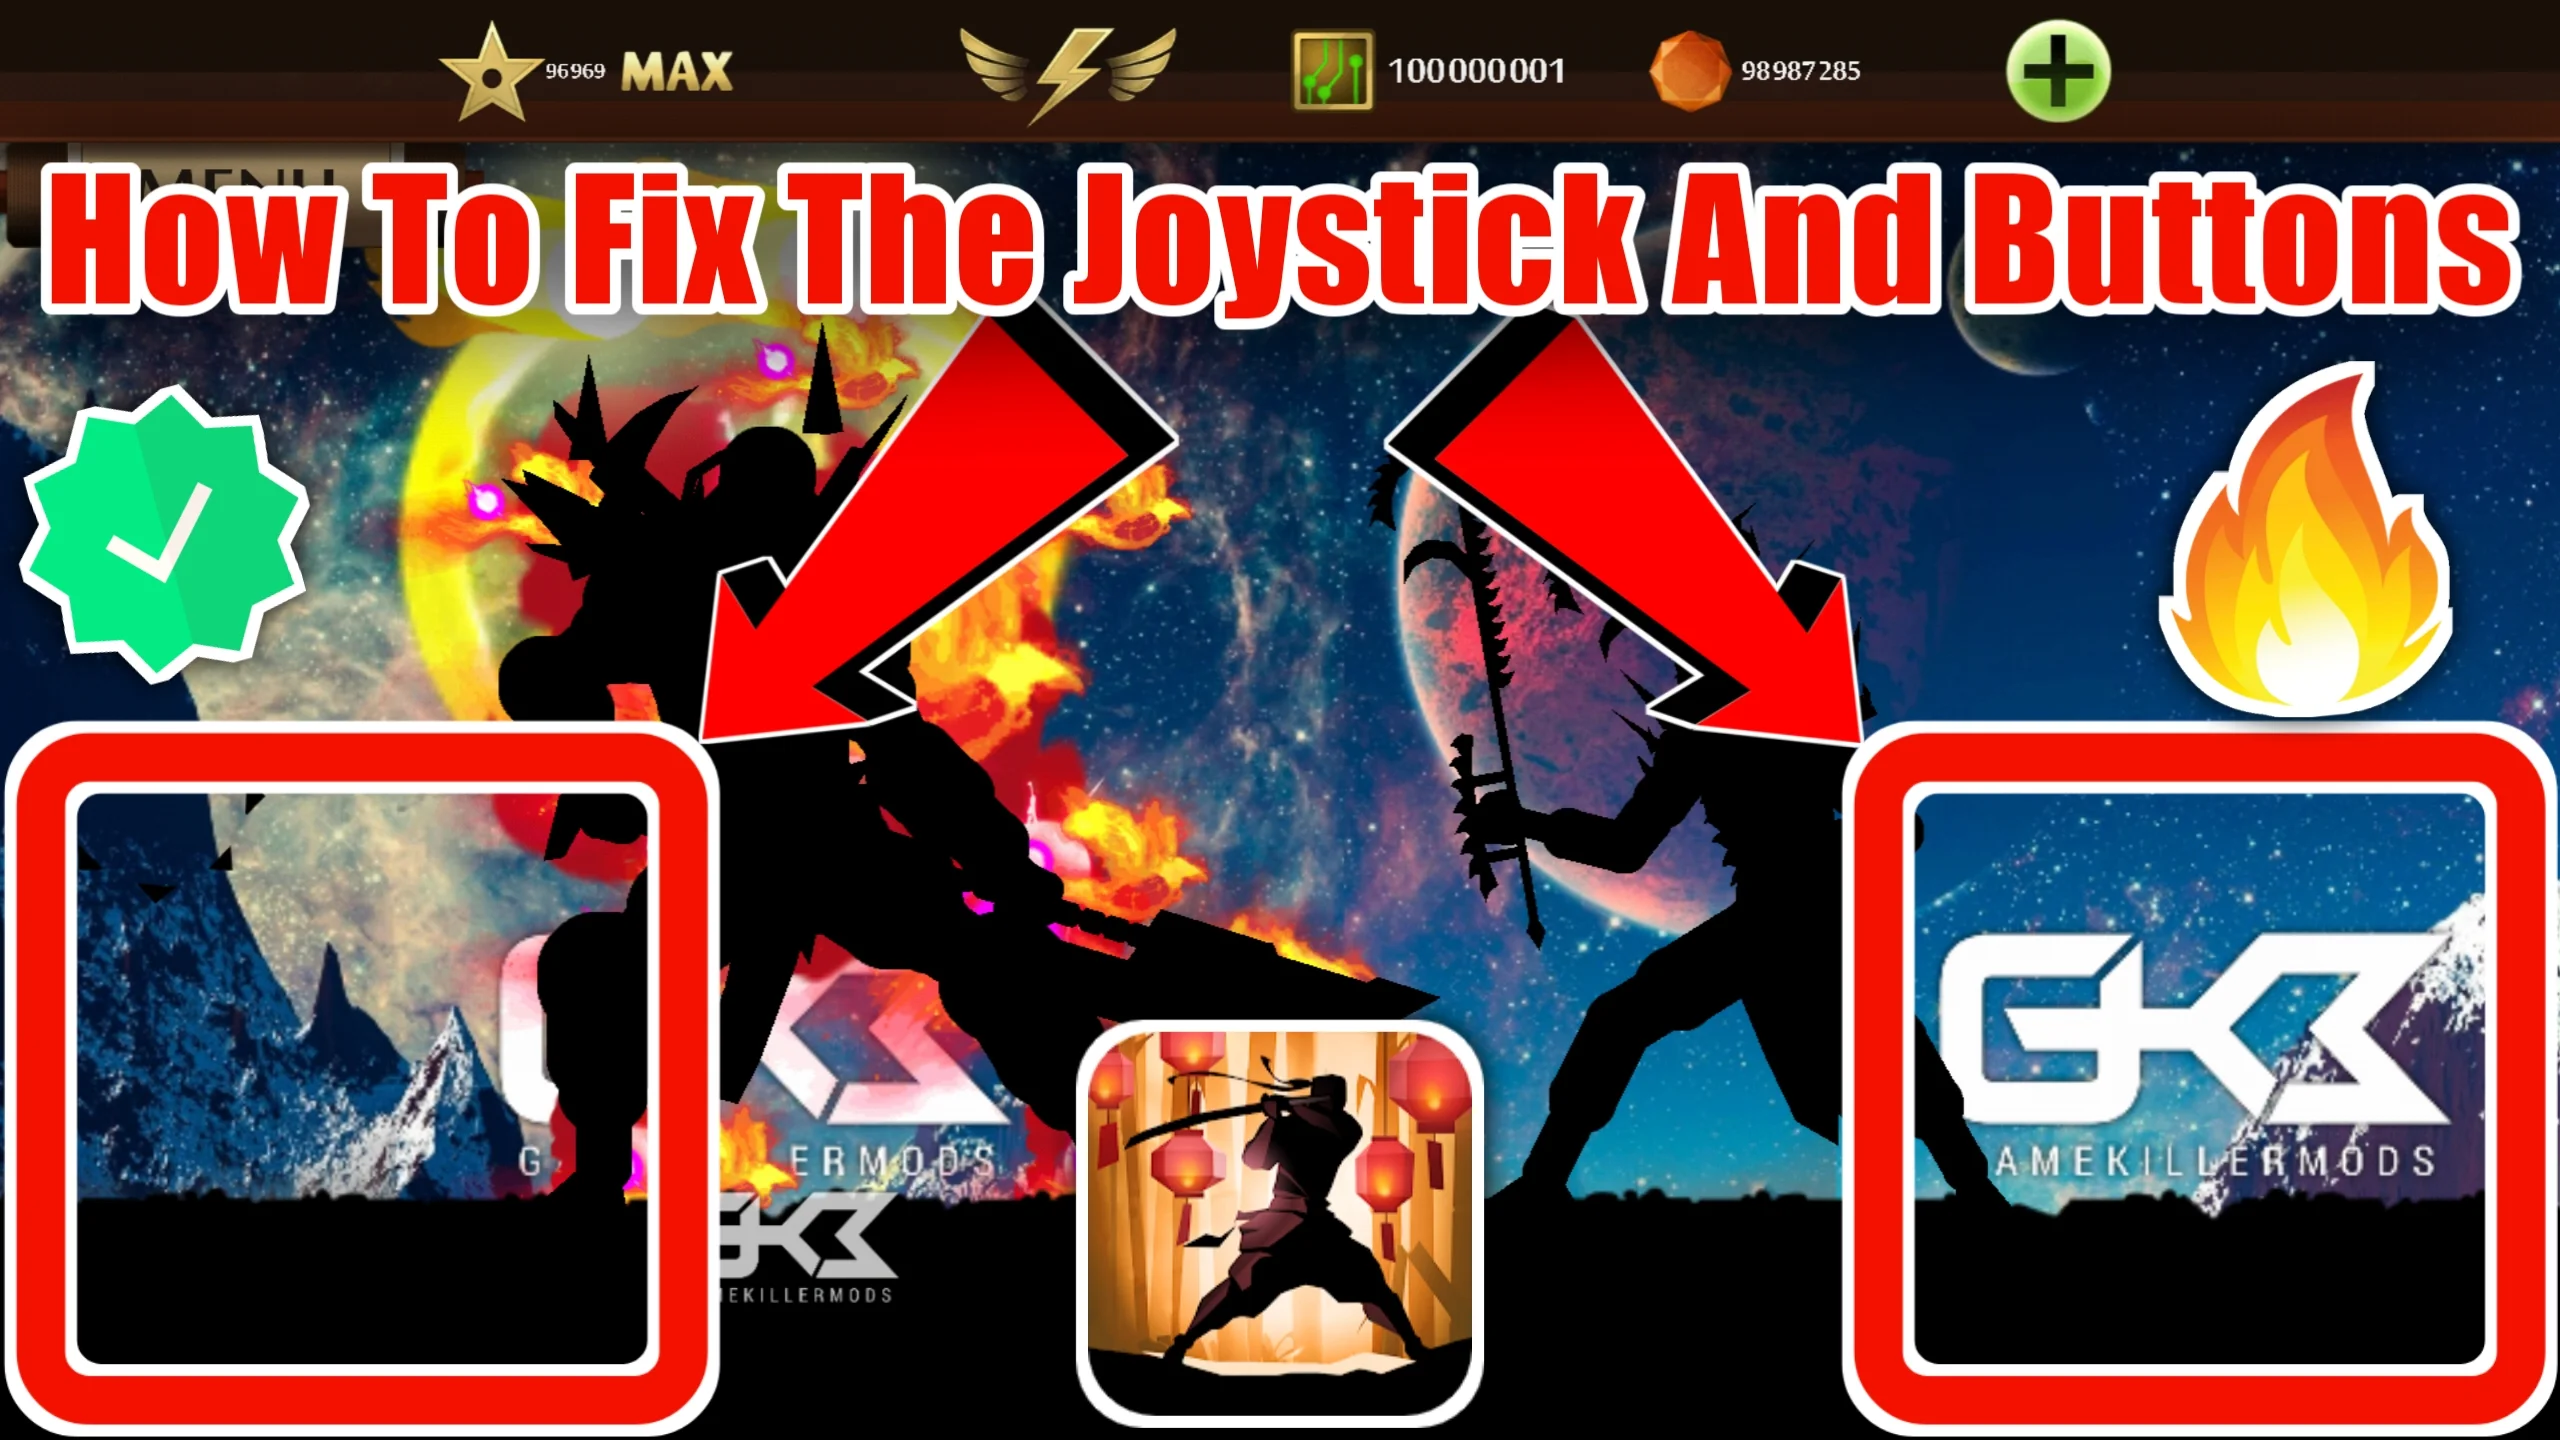 How To Fix Joystick And Buttons in Shadow Fight 2 gamekillermods.com